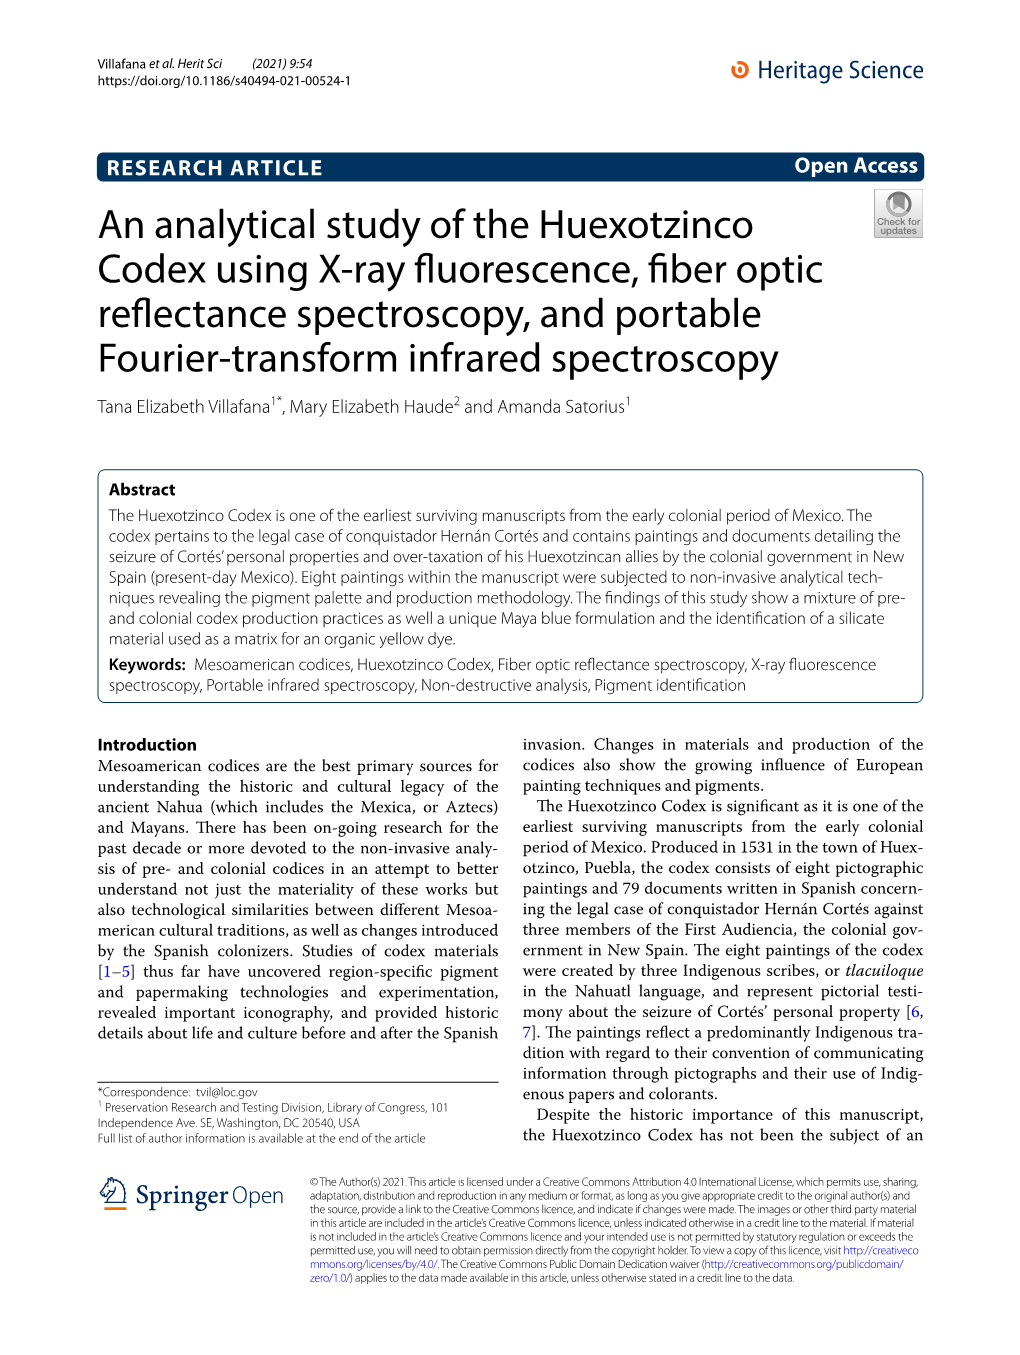 An Analytical Study of the Huexotzinco Codex Using X-Ray Fluorescence